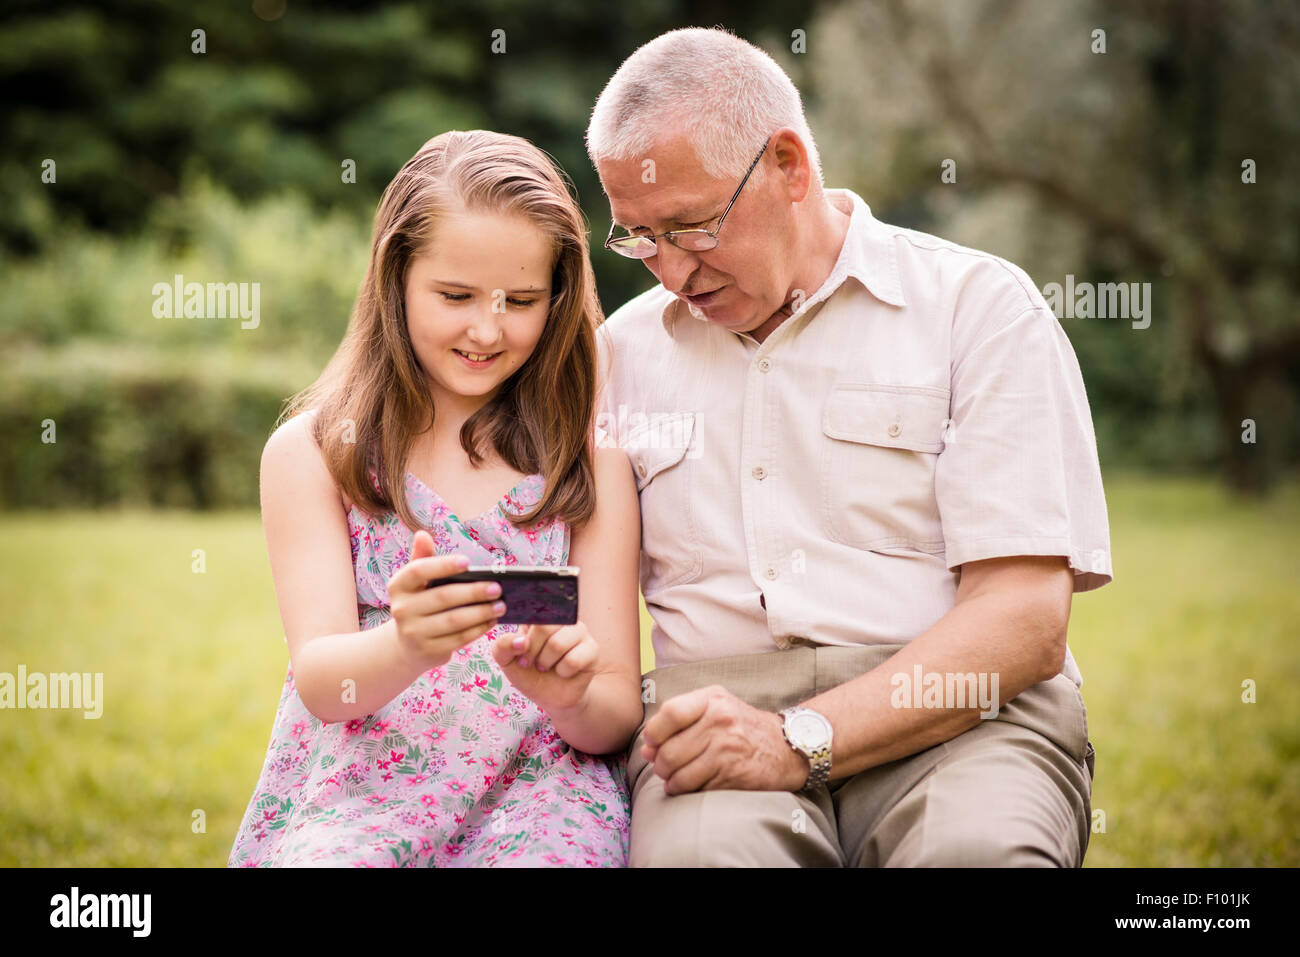 Senior man with his grandchild looking together on photos in smartphone - outdoor in nature Stock Photo